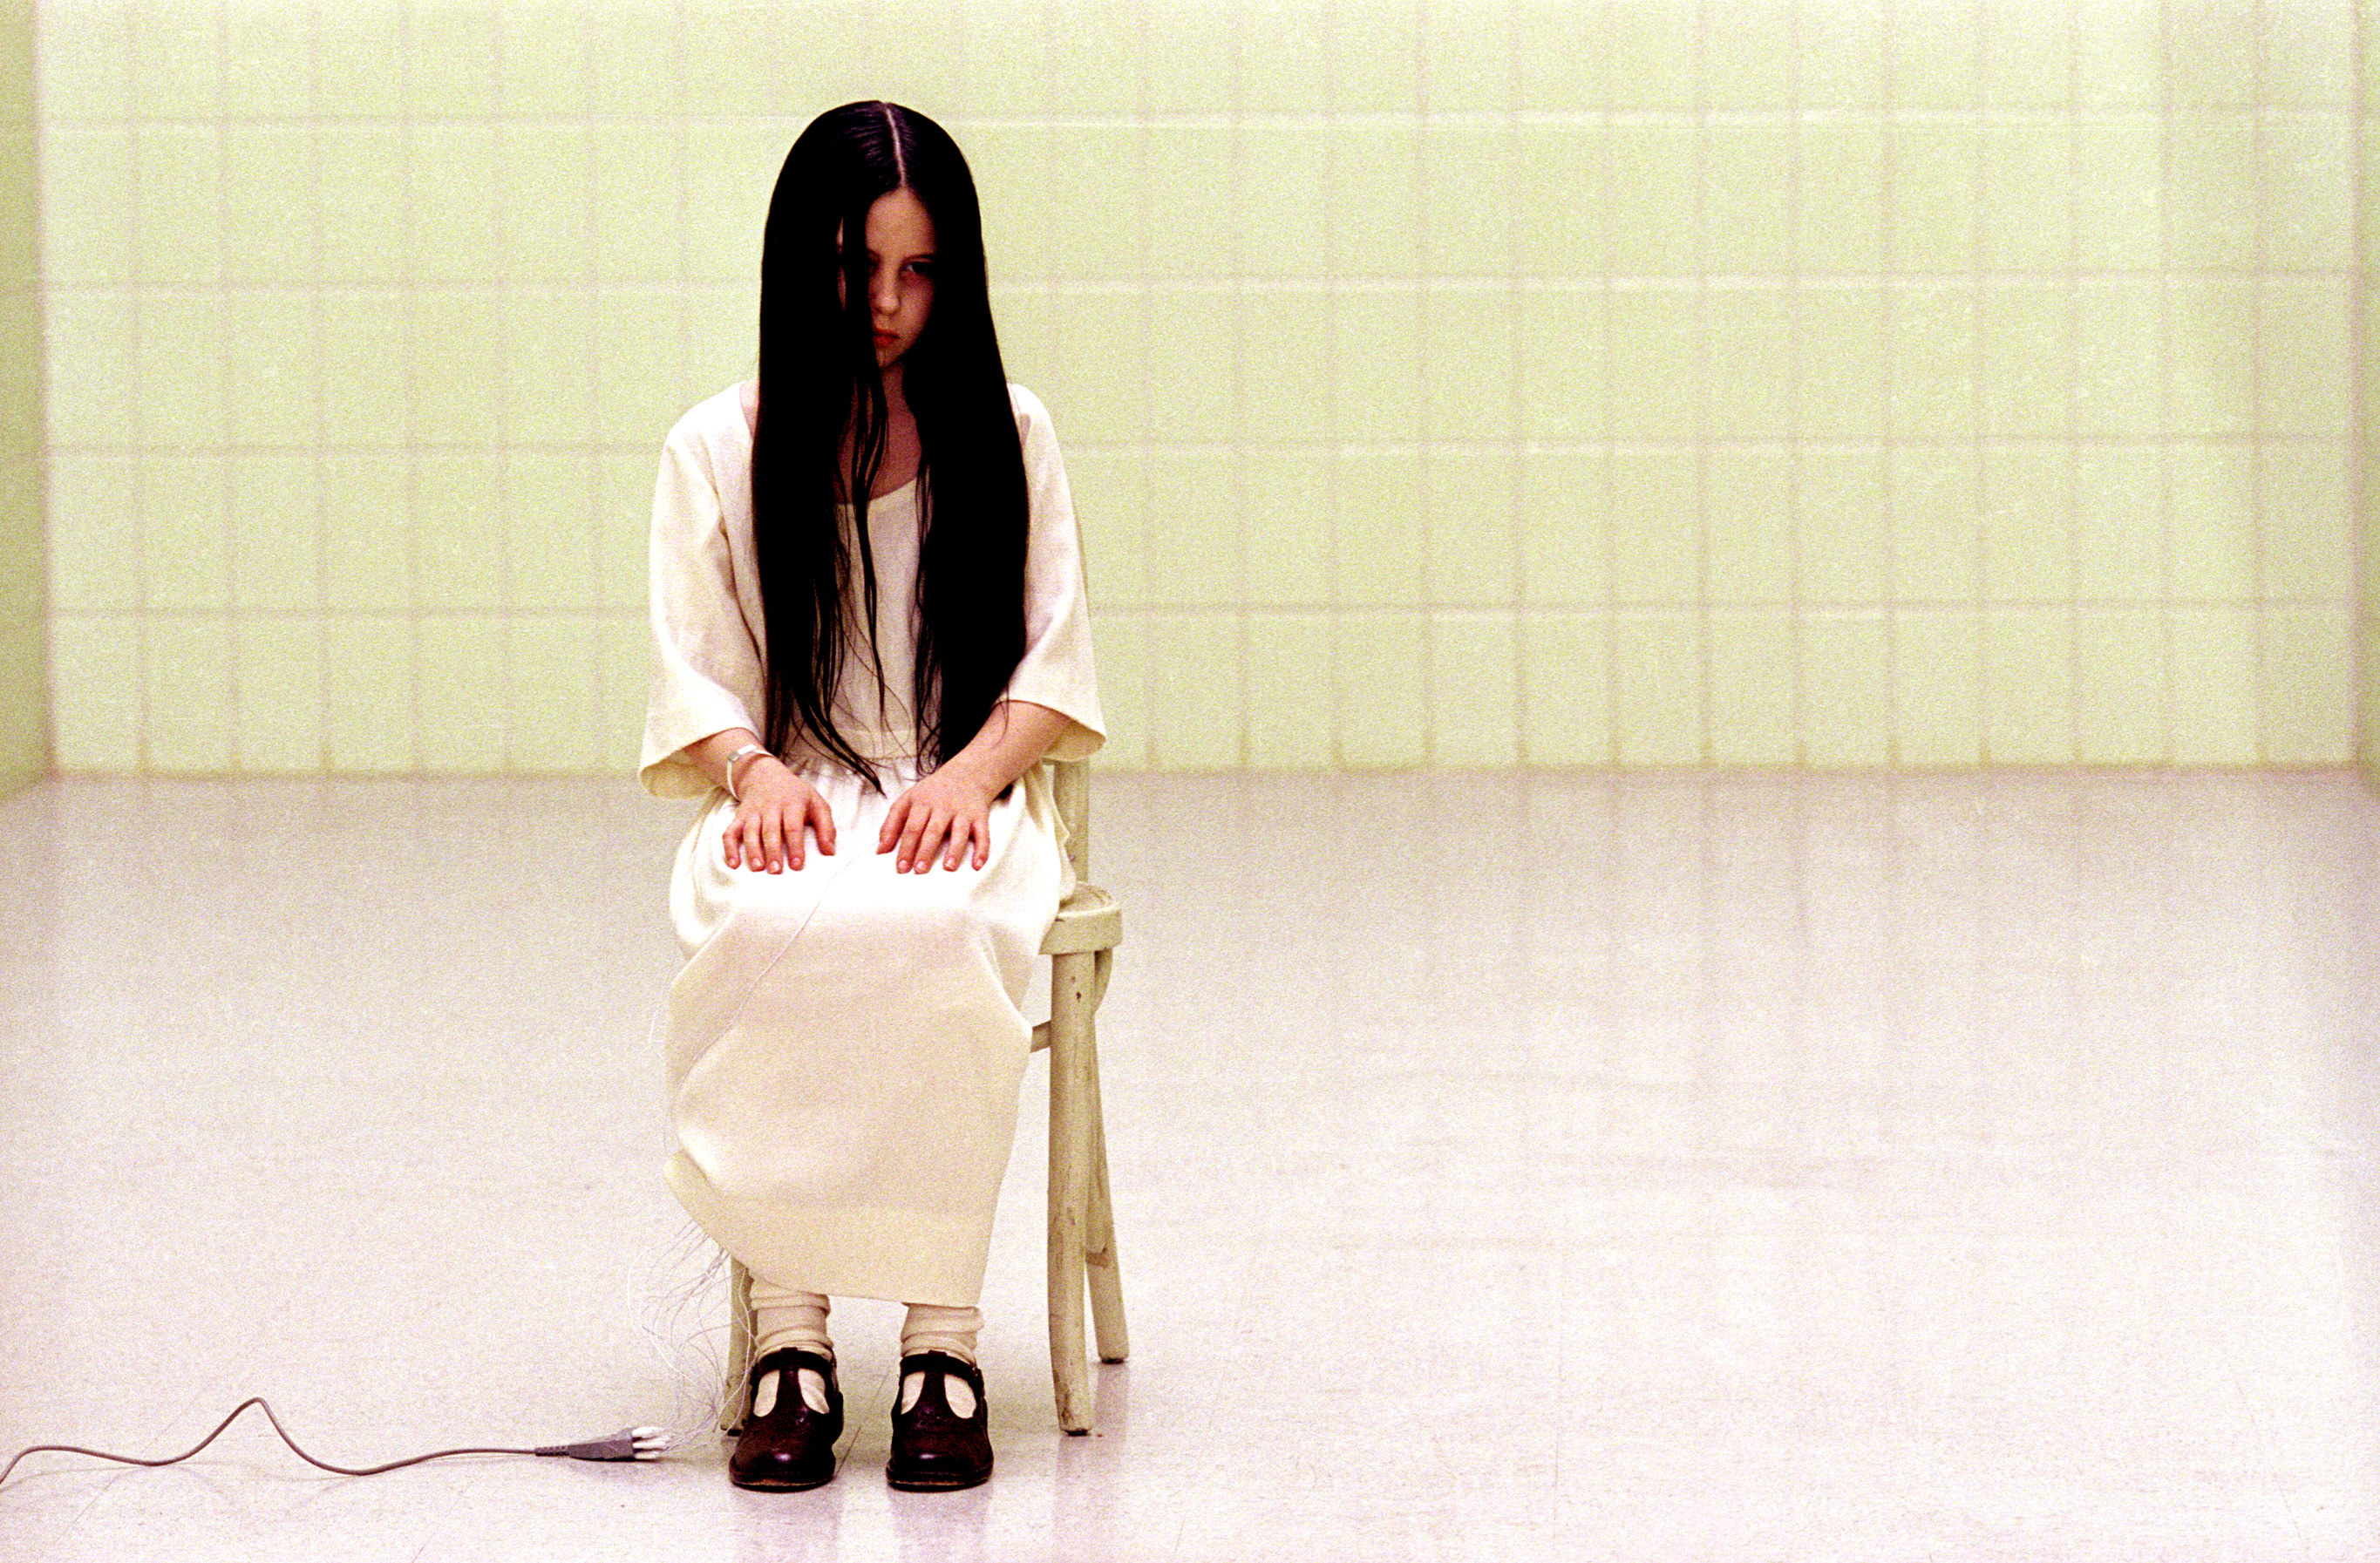 A young girl with long hair, sitting in an empty exam room